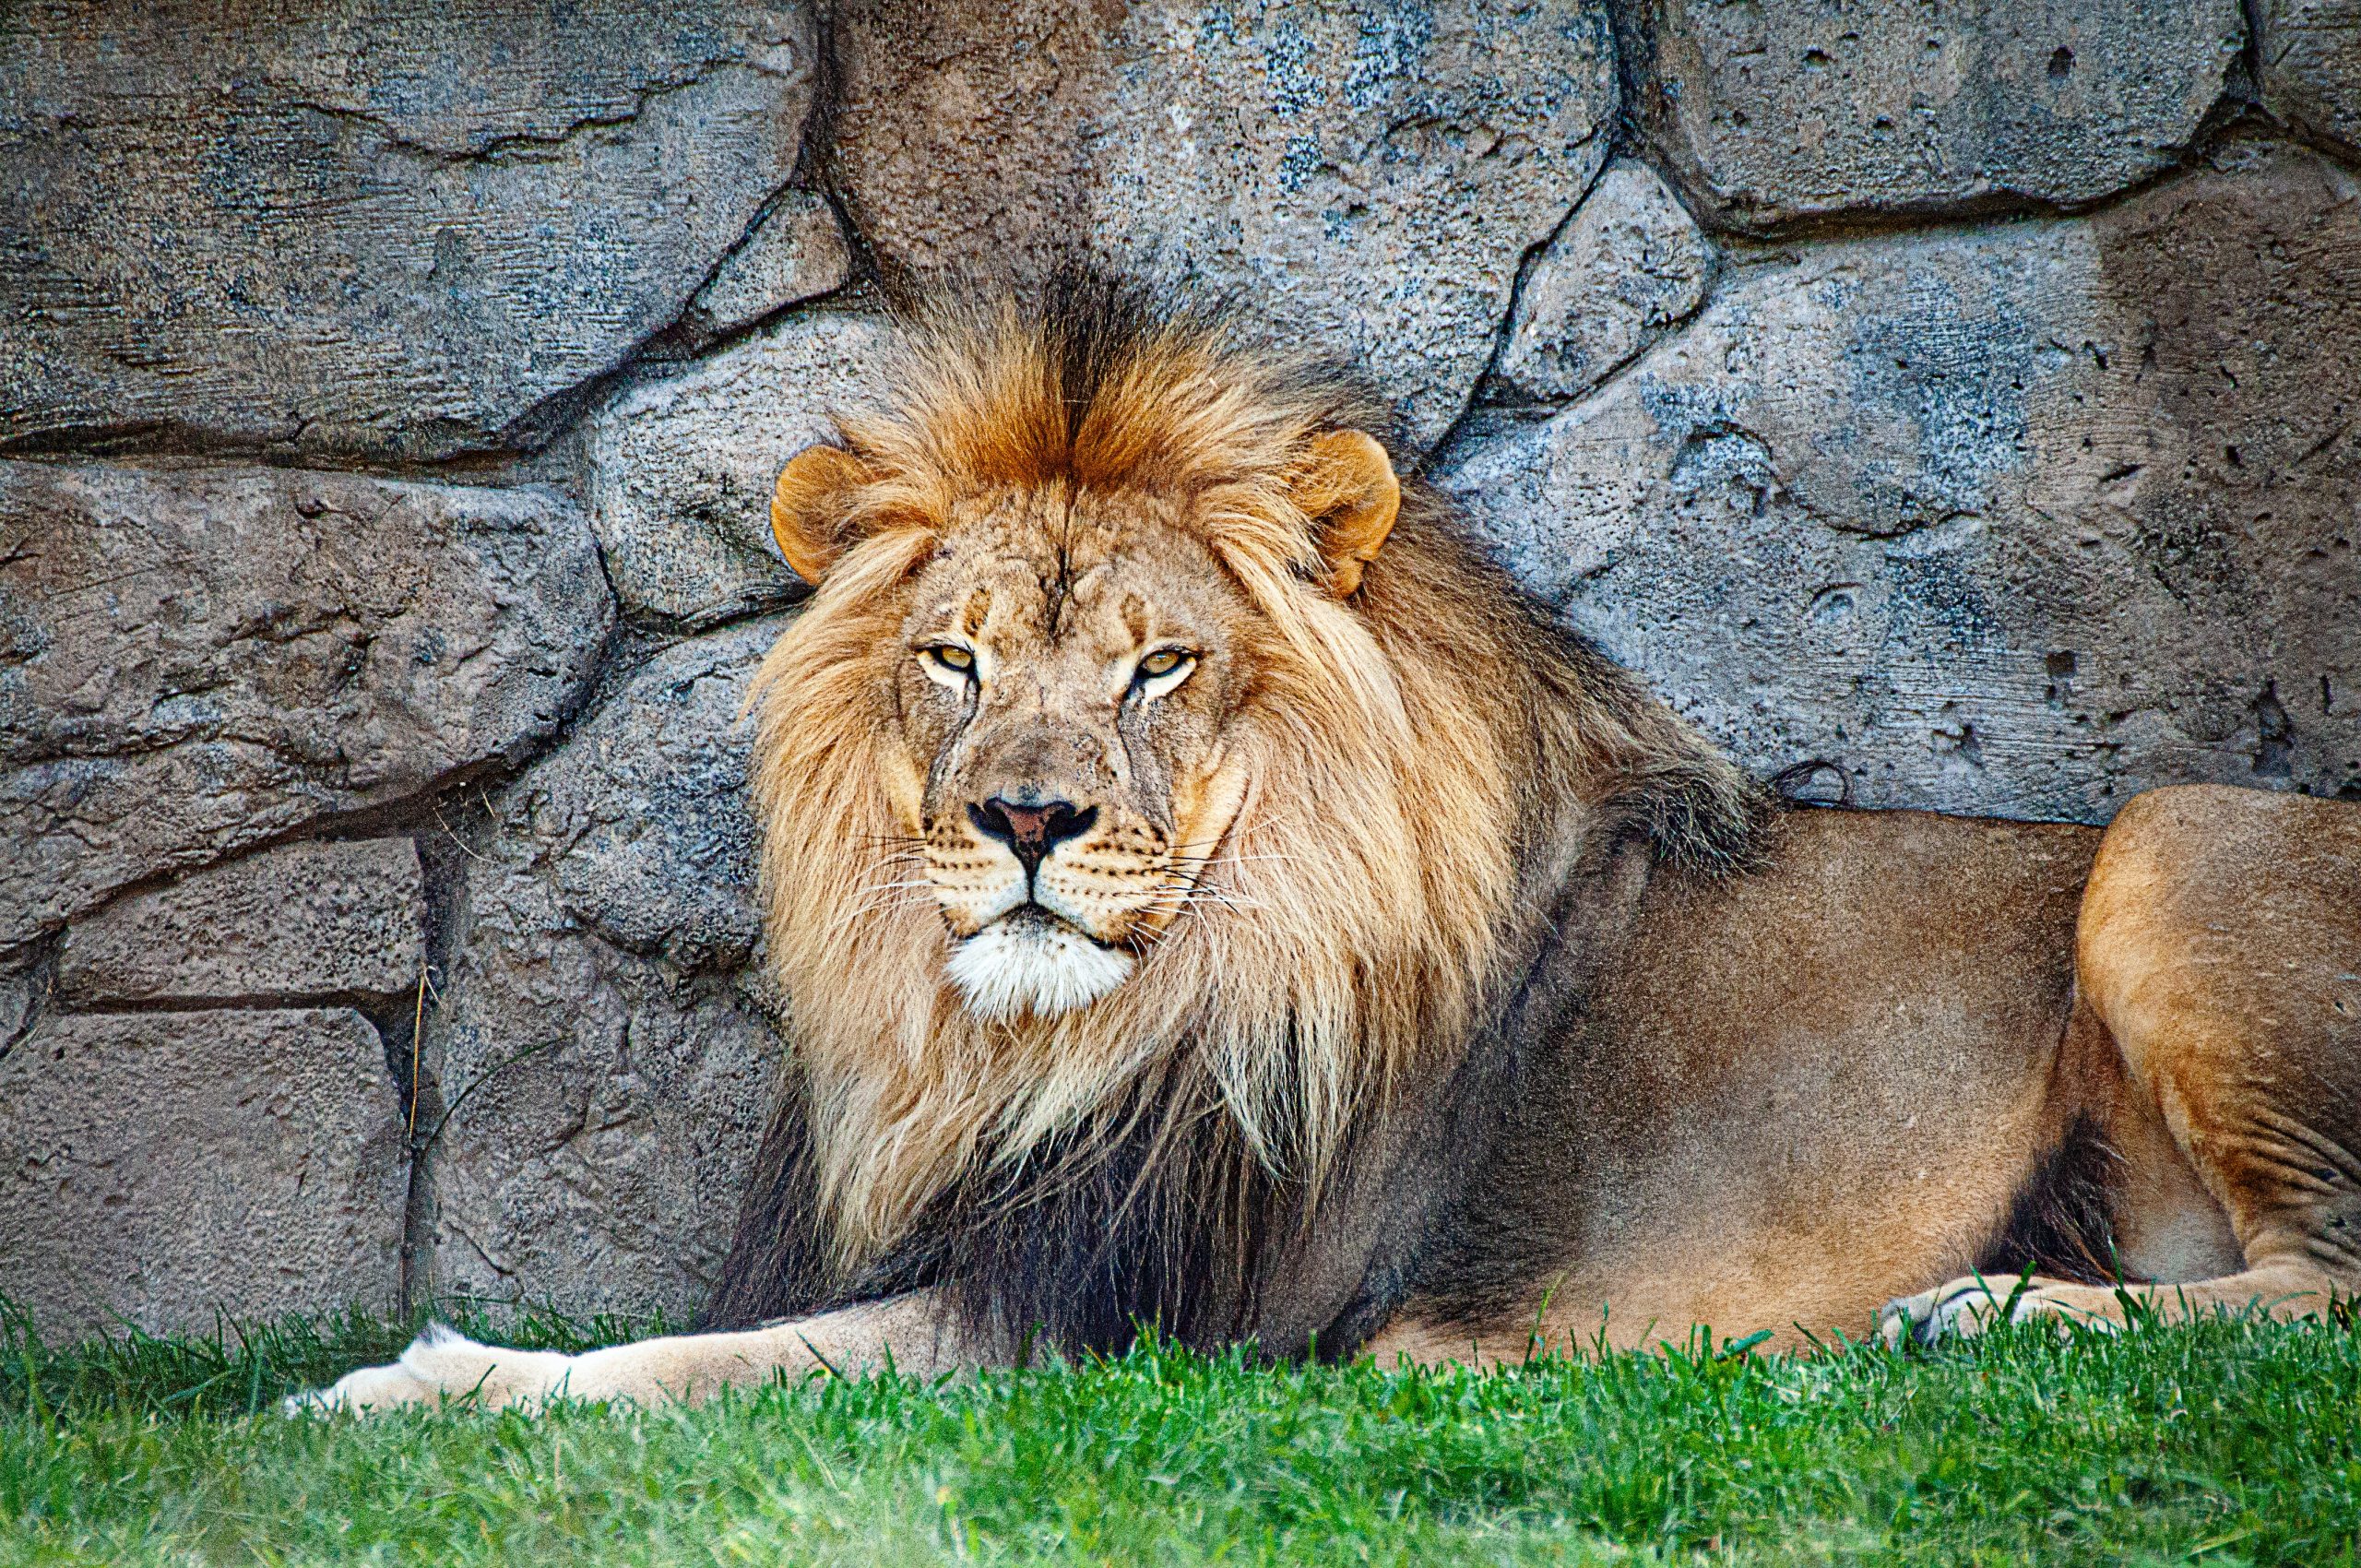 Which country’s national animal is the majestic lion?